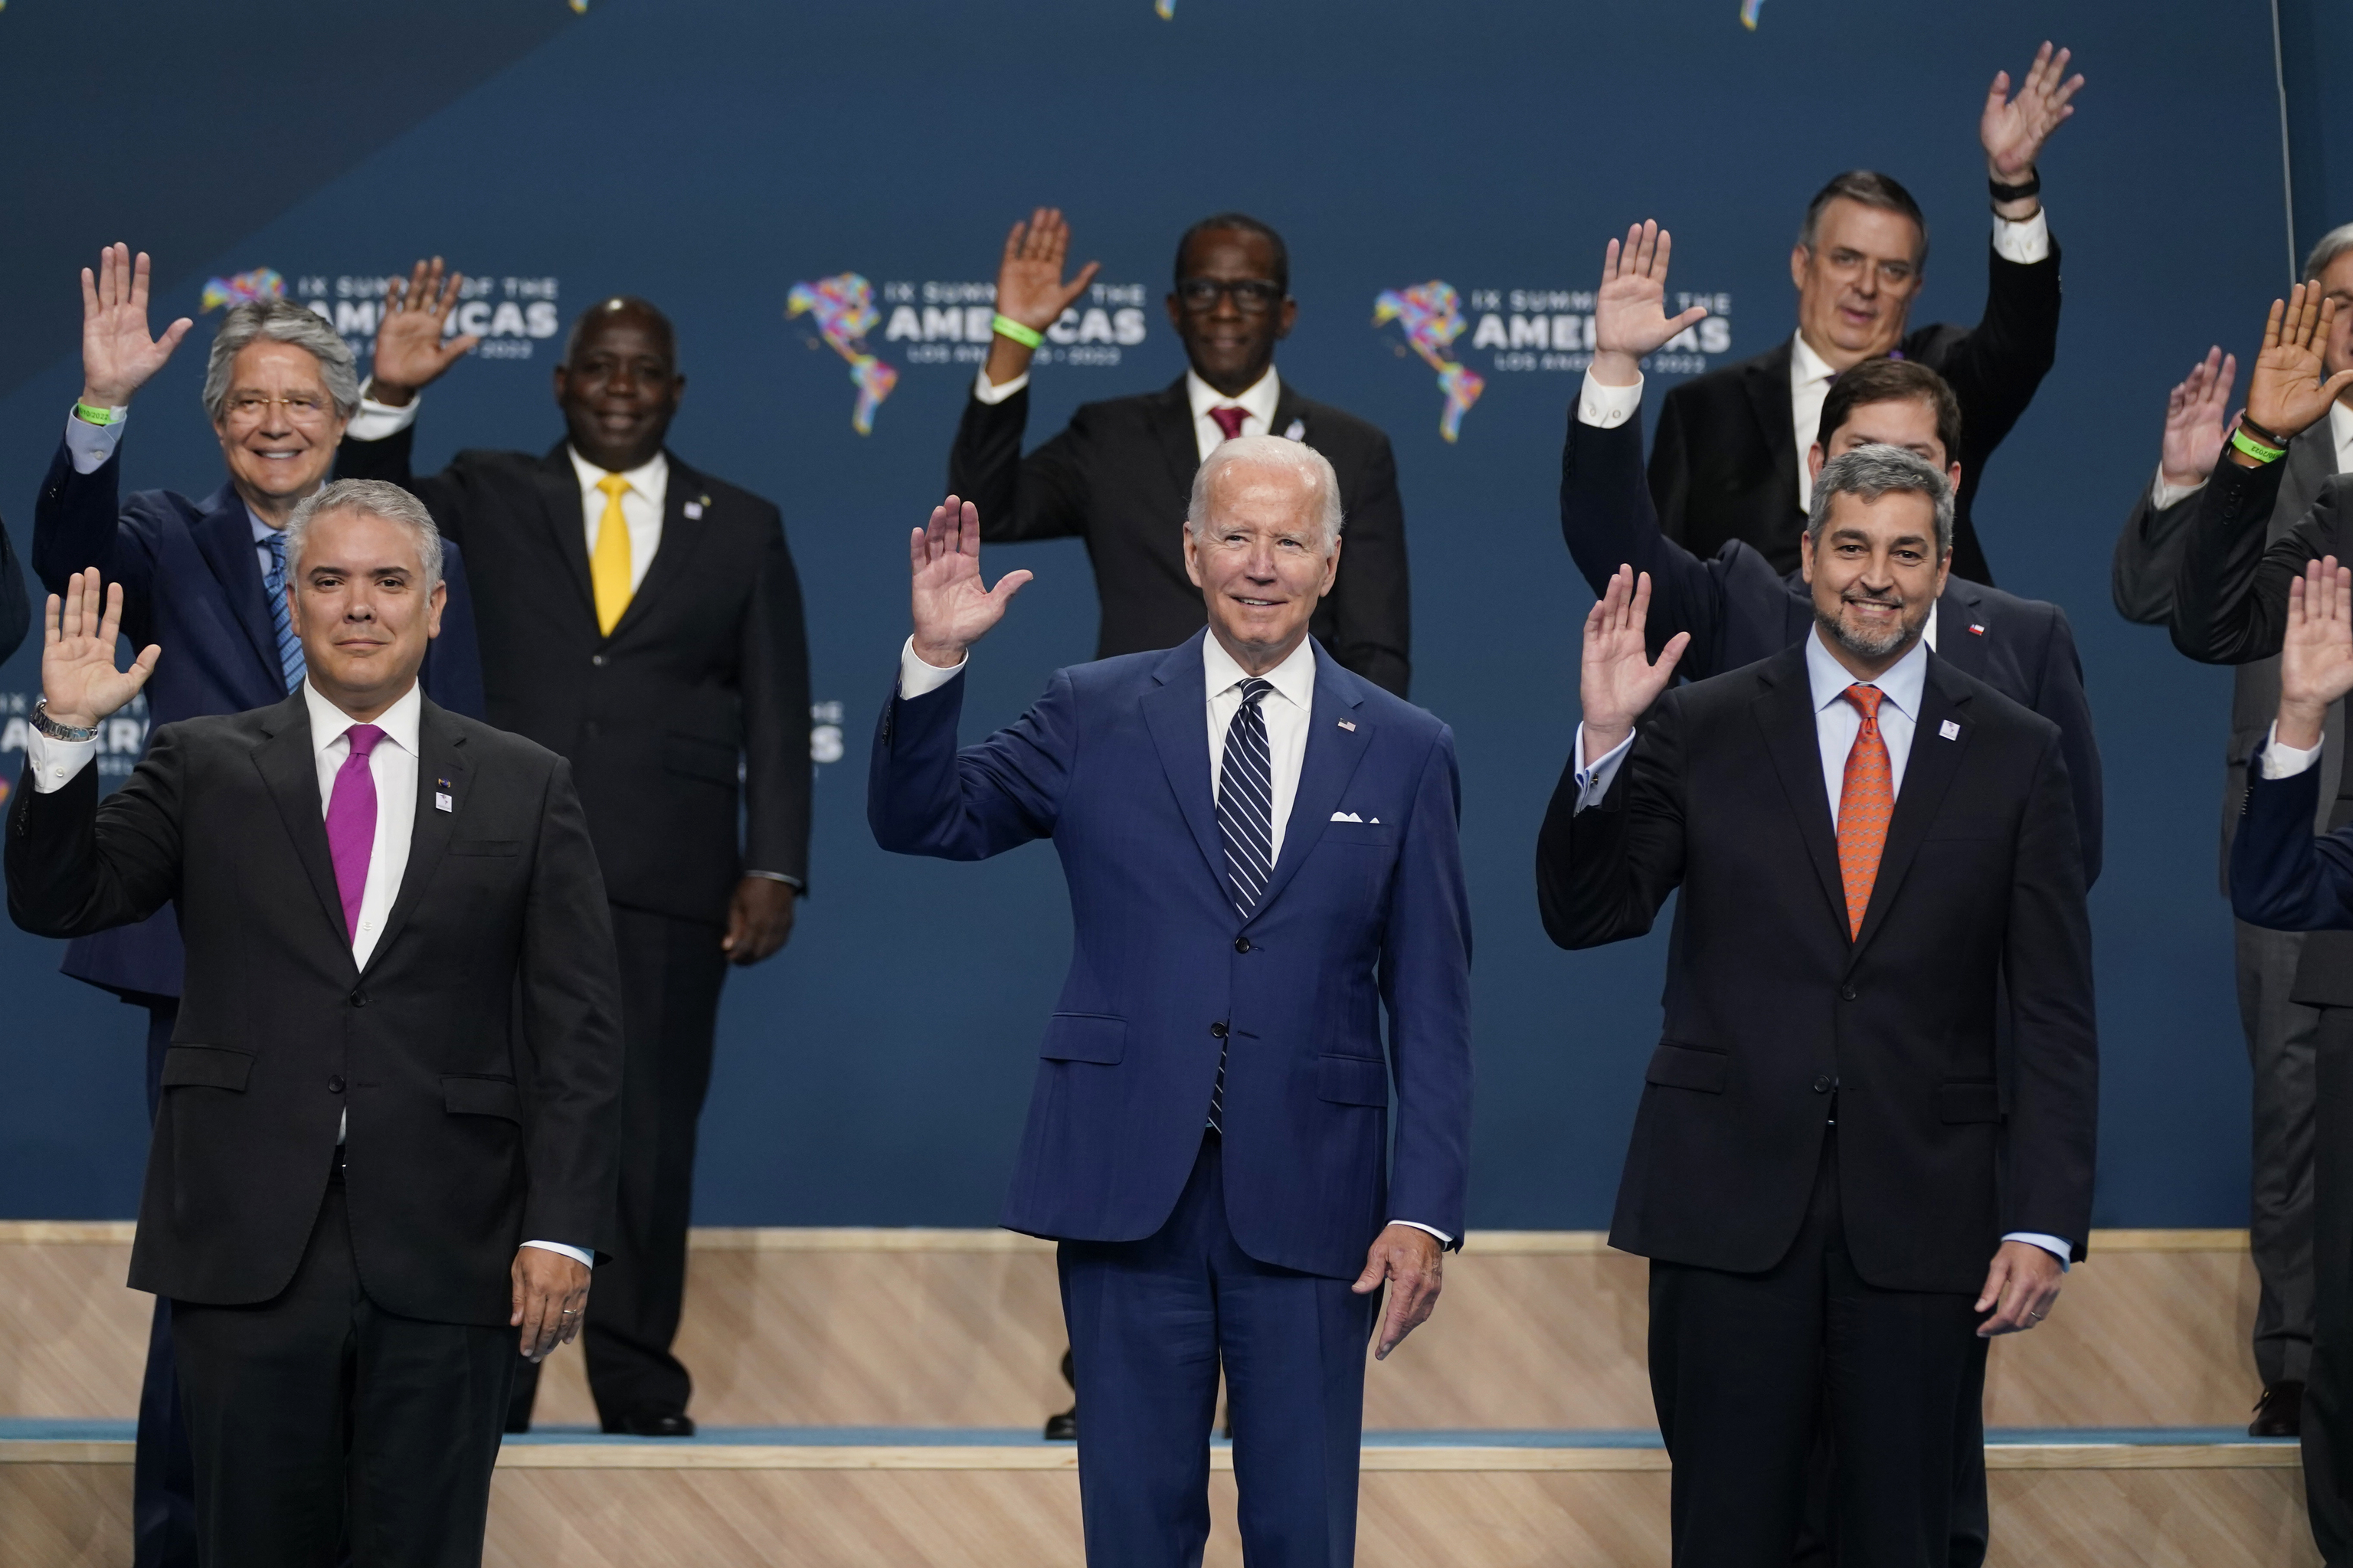 President Joe Biden, center, attends a family photo with the Presidents of Colombia, Iv